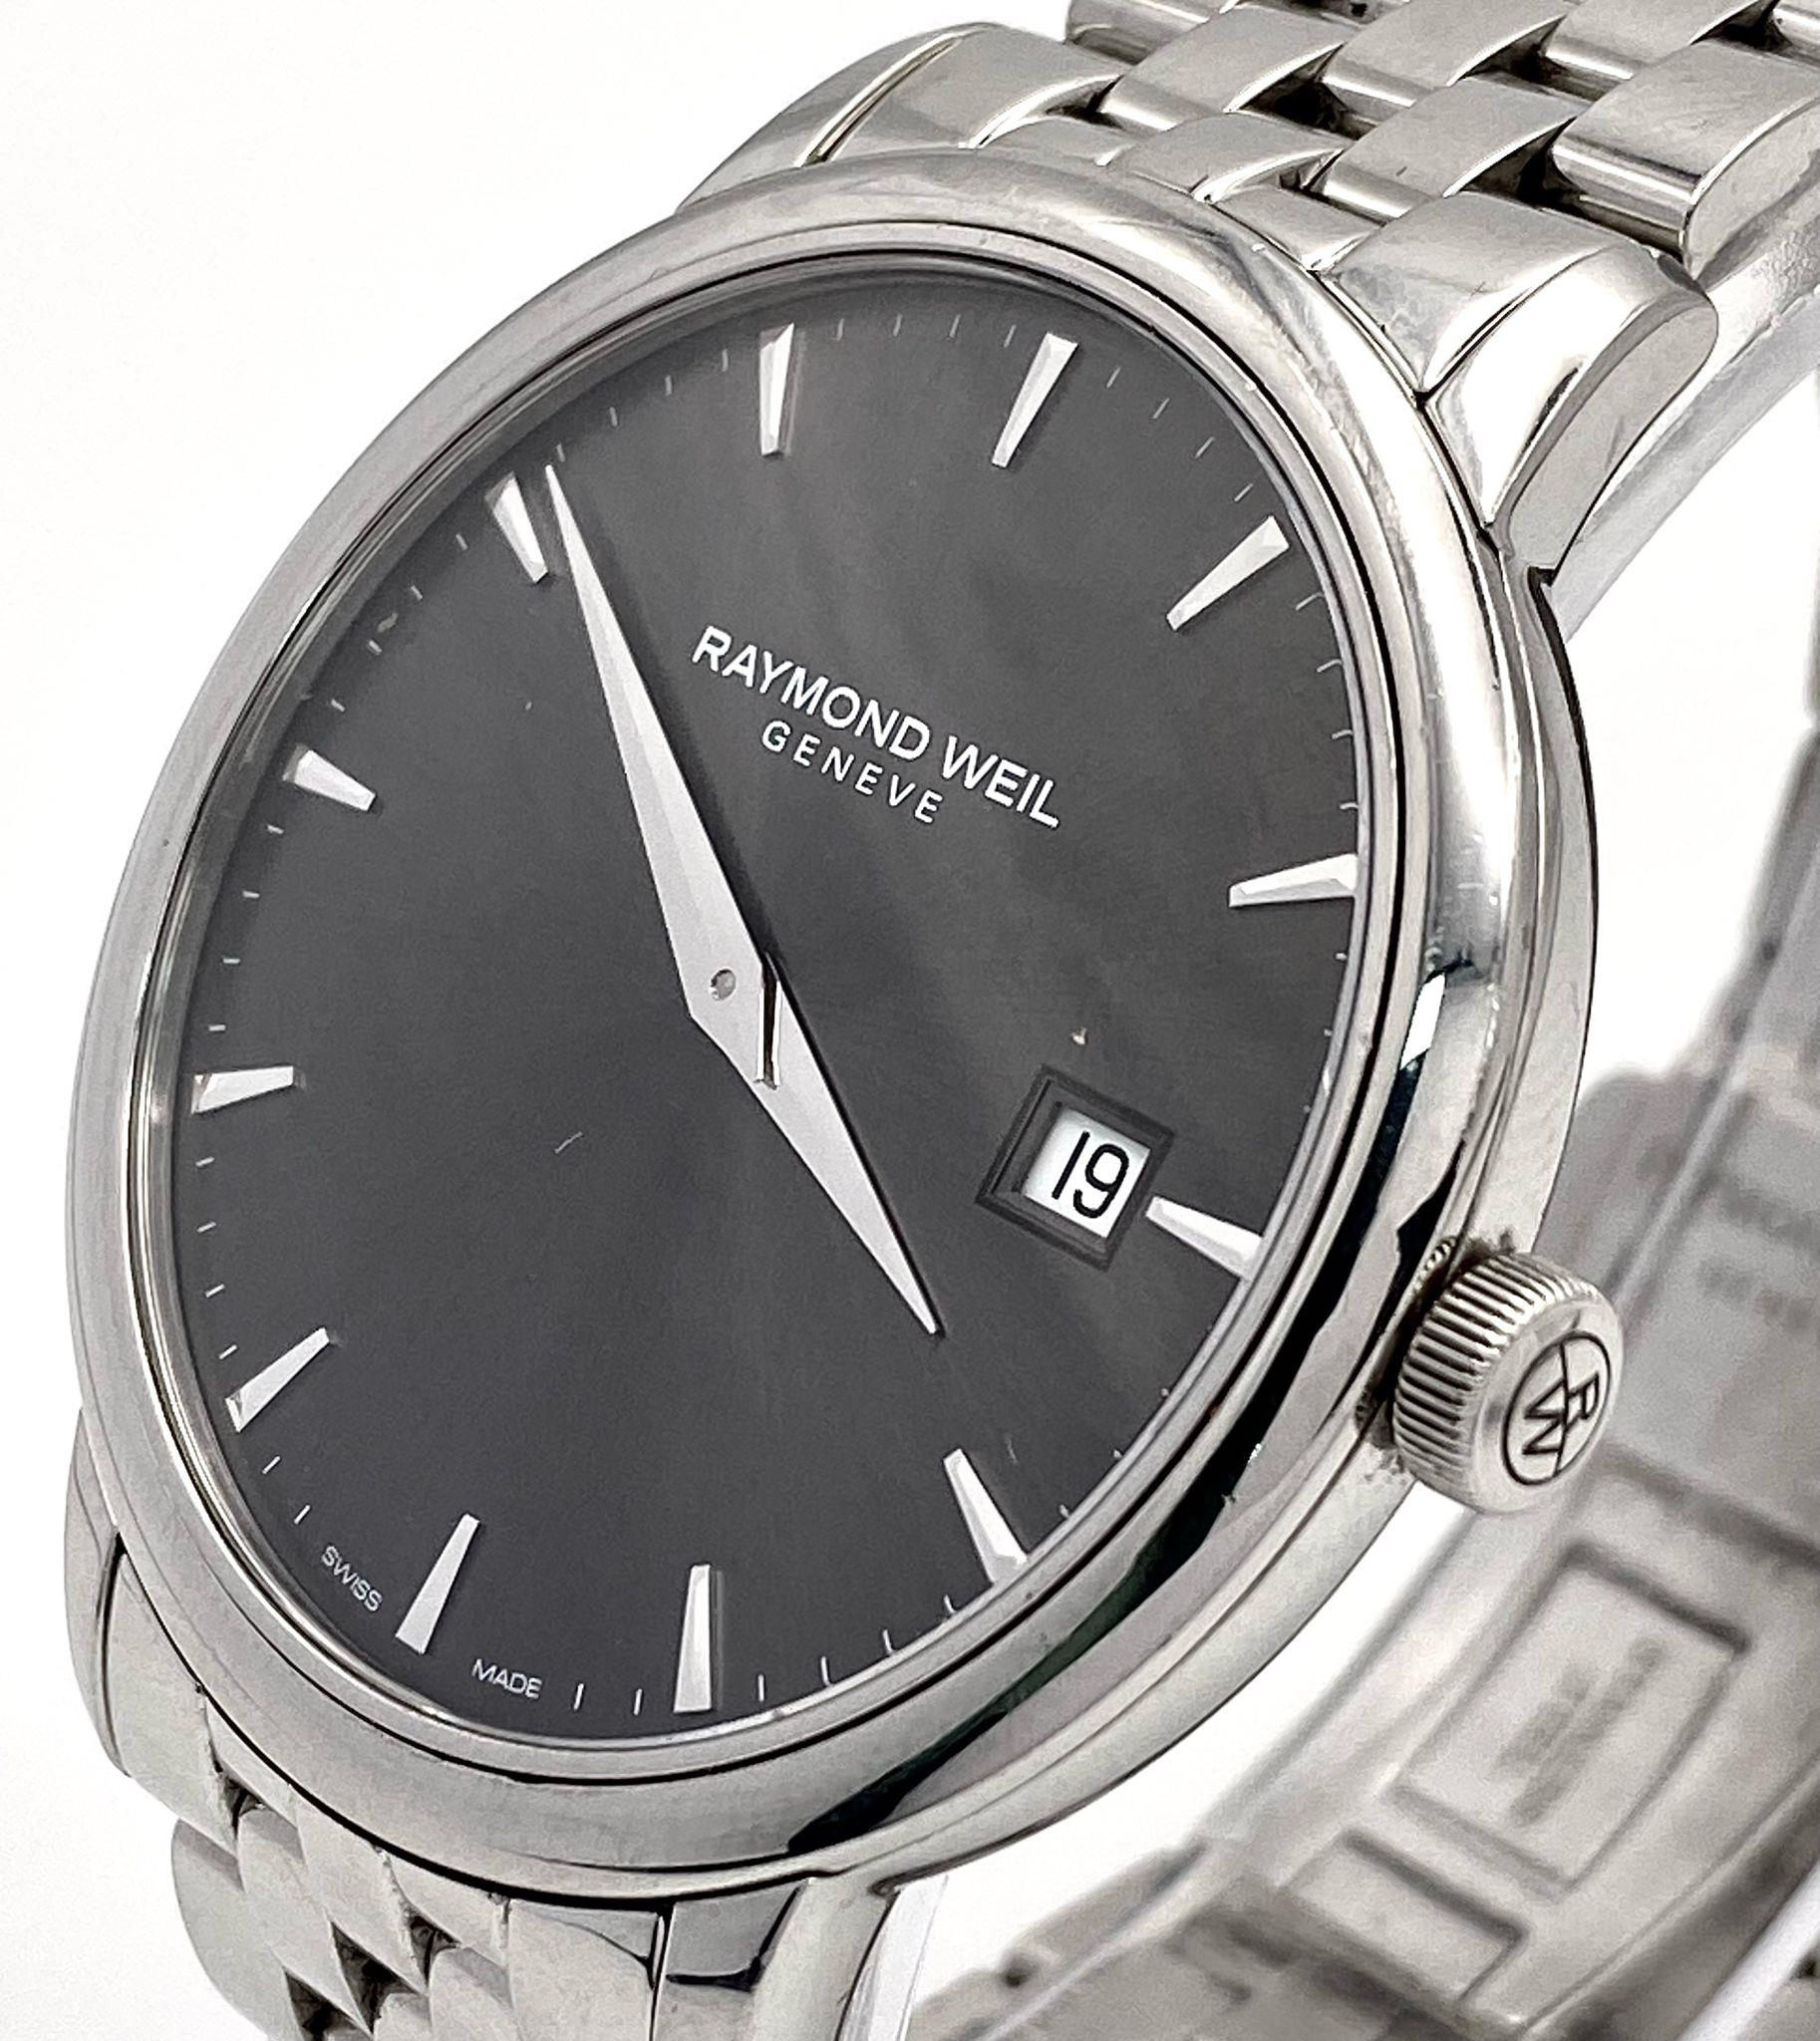 A Classic Raymond Weil Geneve Quartz Gents Watch. Stainless steel bracelet and case - 39mm. Silver - Image 4 of 10